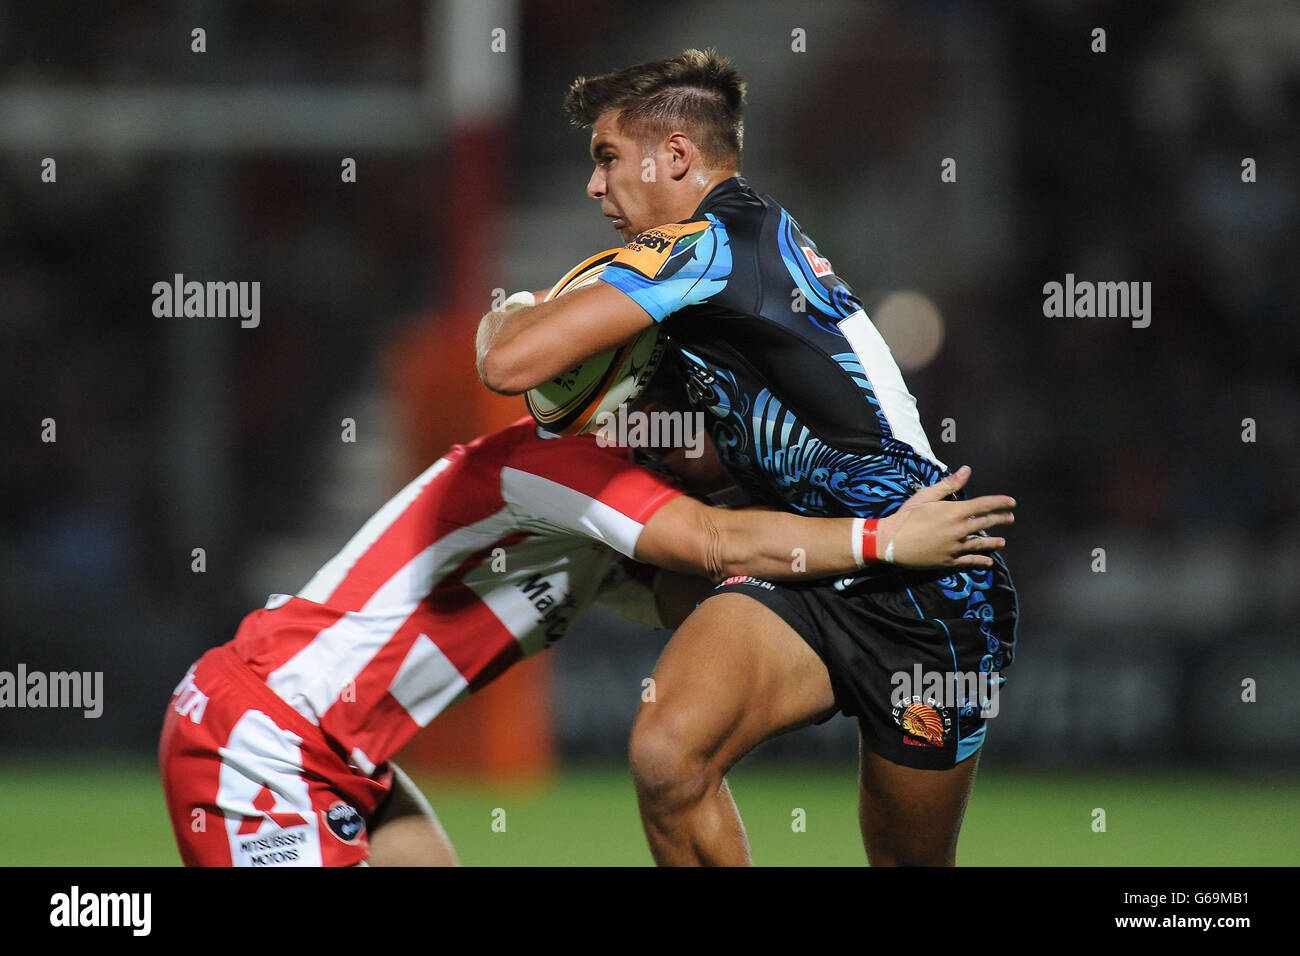 Exeter Chiefs 7's Rob Coote in action during the Group A match of the J.P. Morgan Asset Management Premiership Rugby 7's at Kingsholm Stadium, Gloucester. Stock Photo